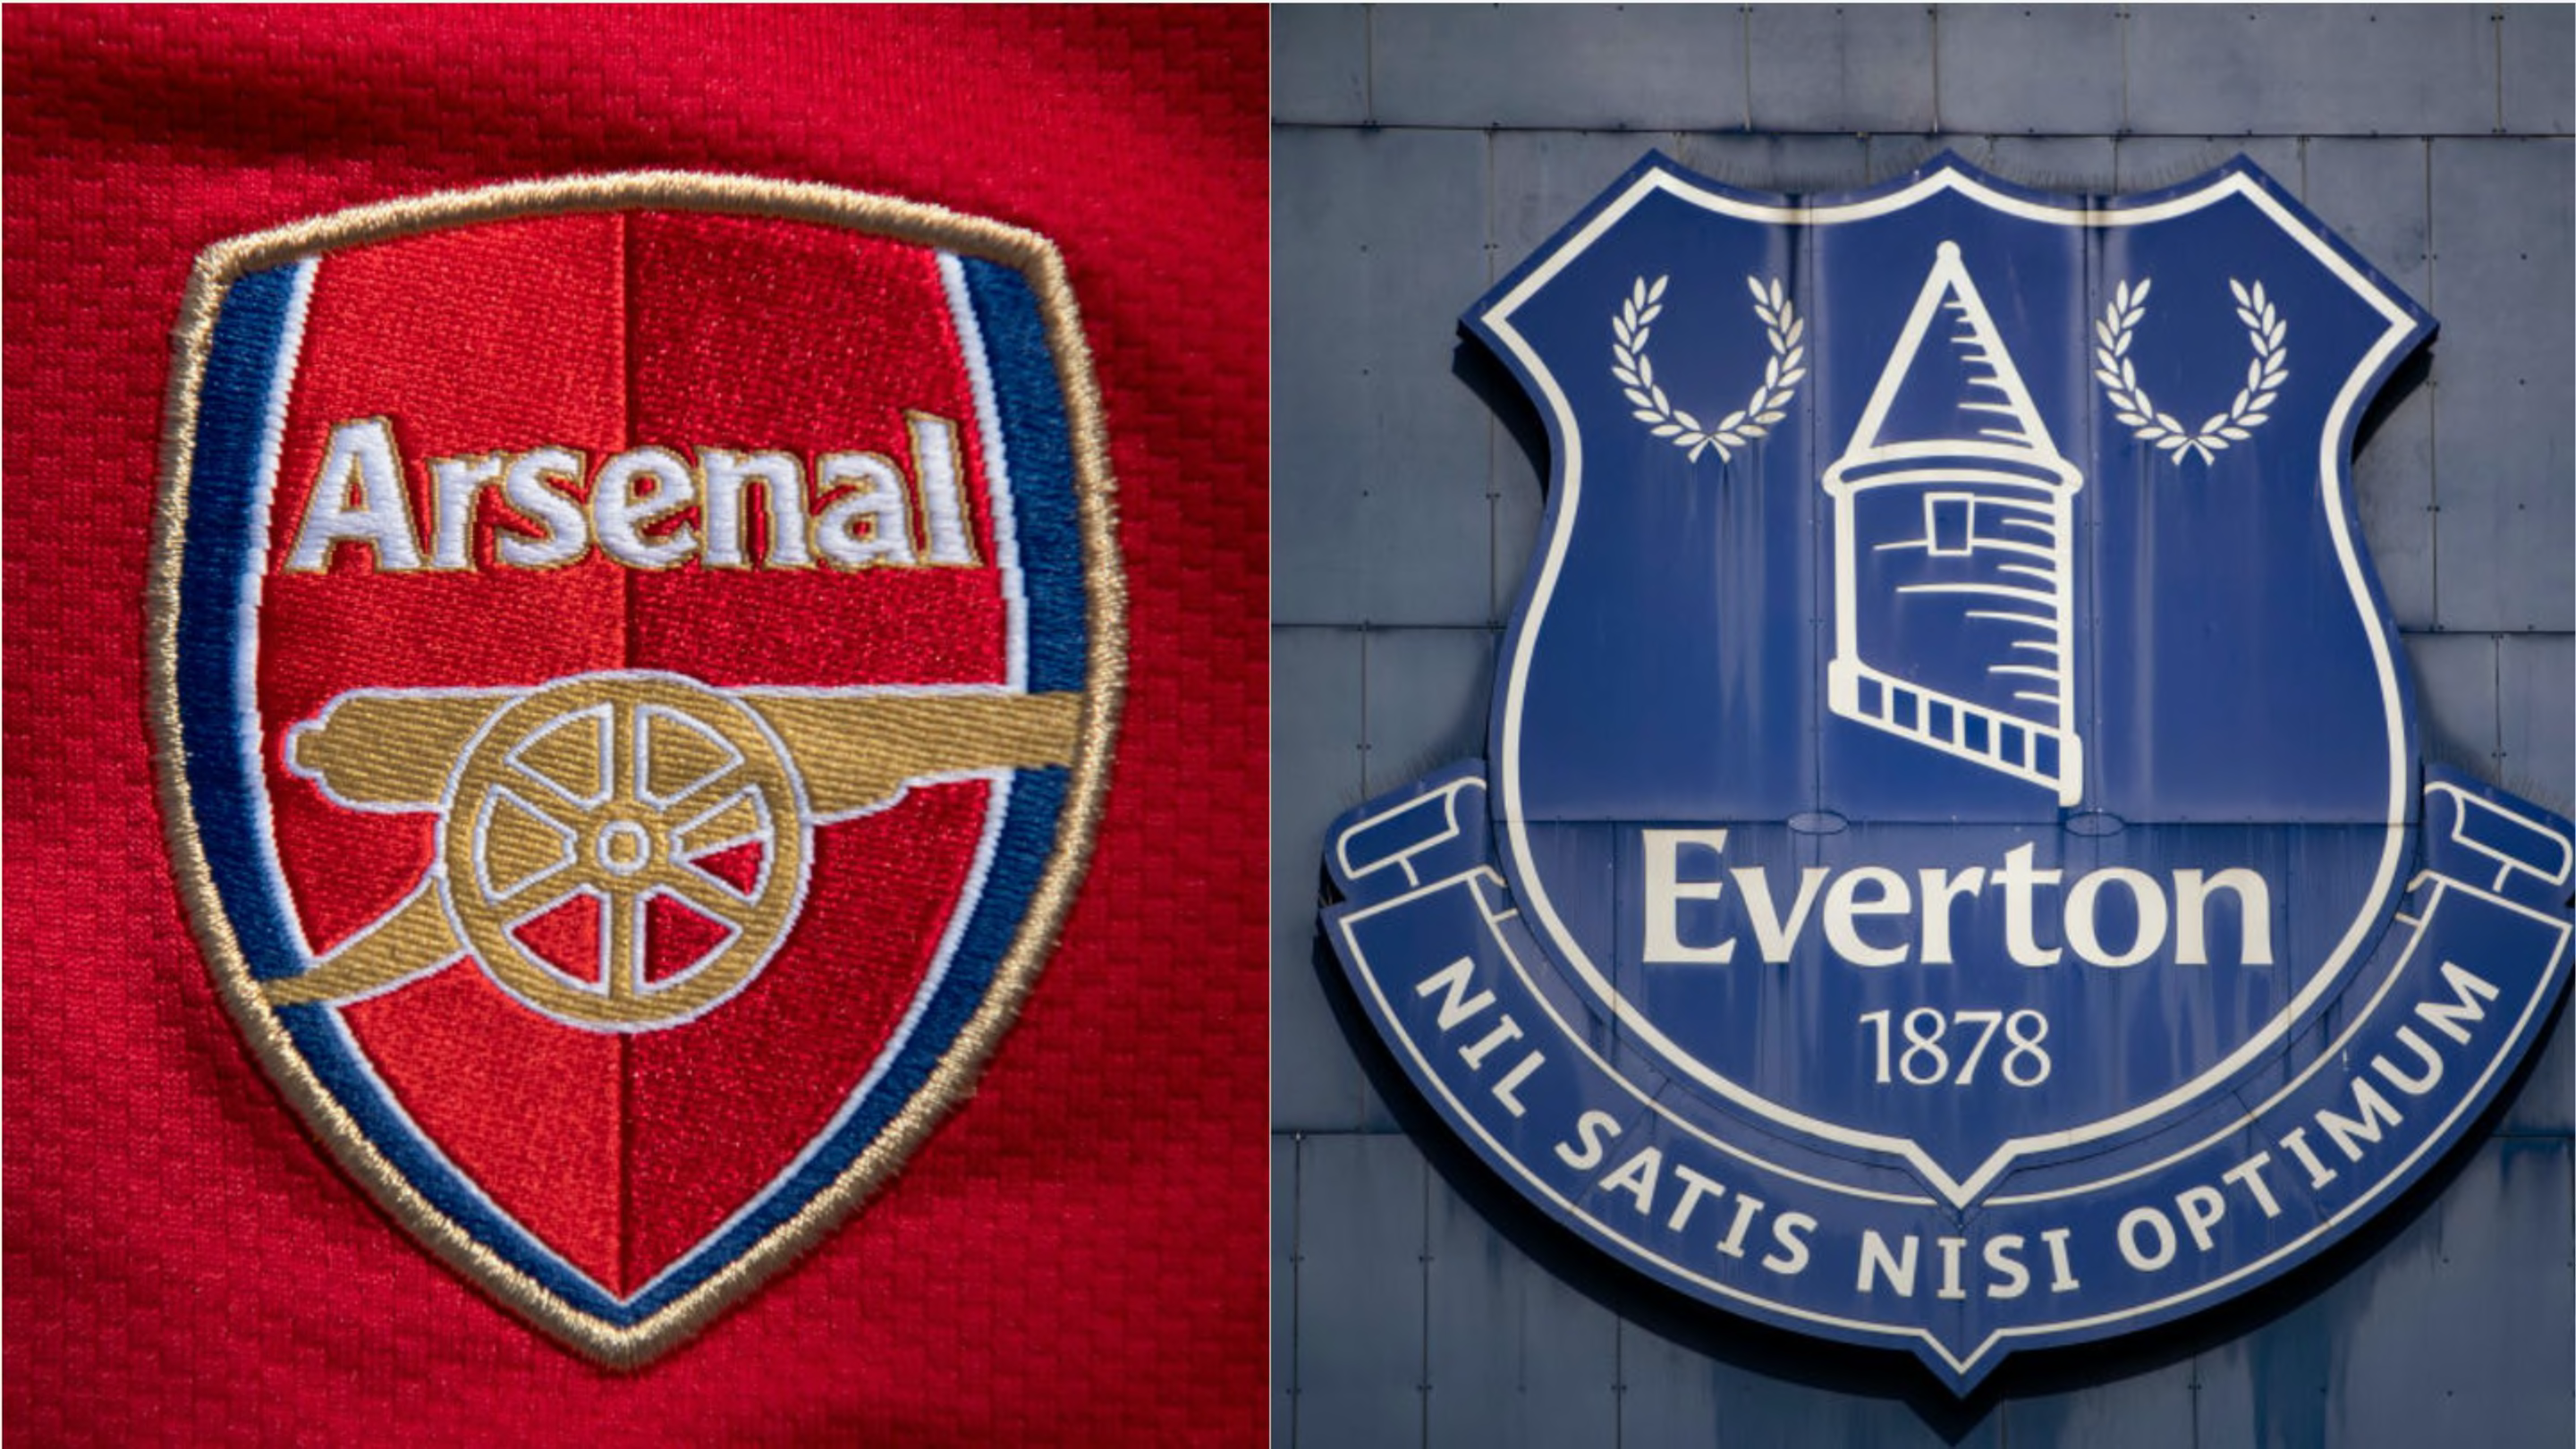 Arsenal vs Everton: Preview, predictions and lineups